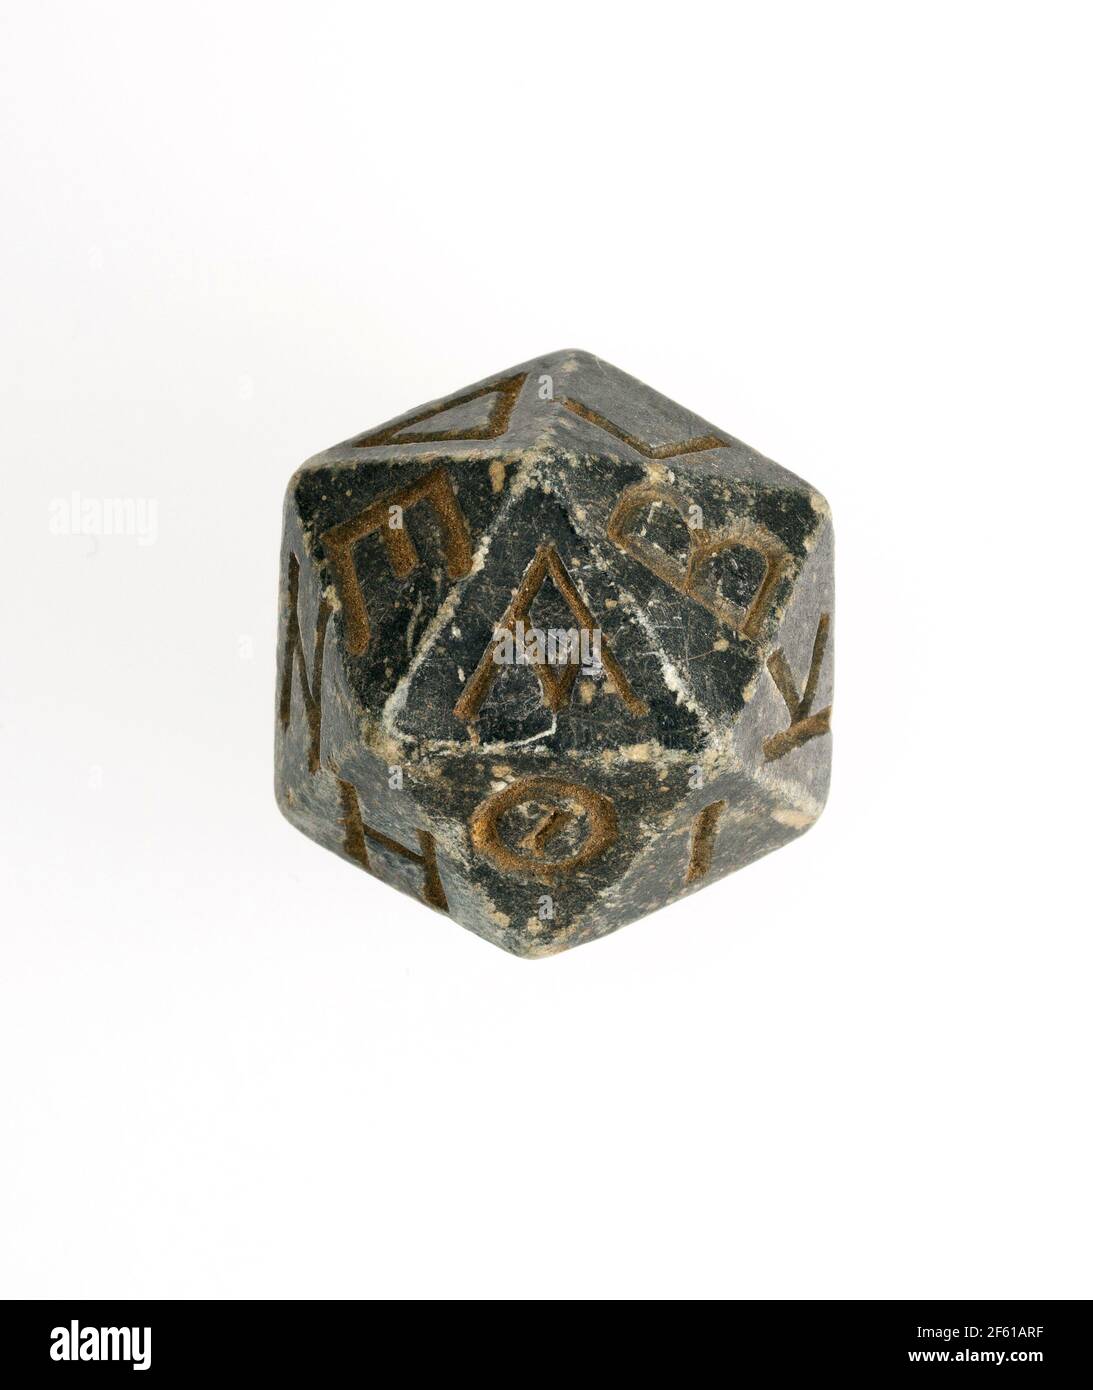 Twenty-sided Die (Icosahedron) with Greek Letters, Egyptian Stock Photo